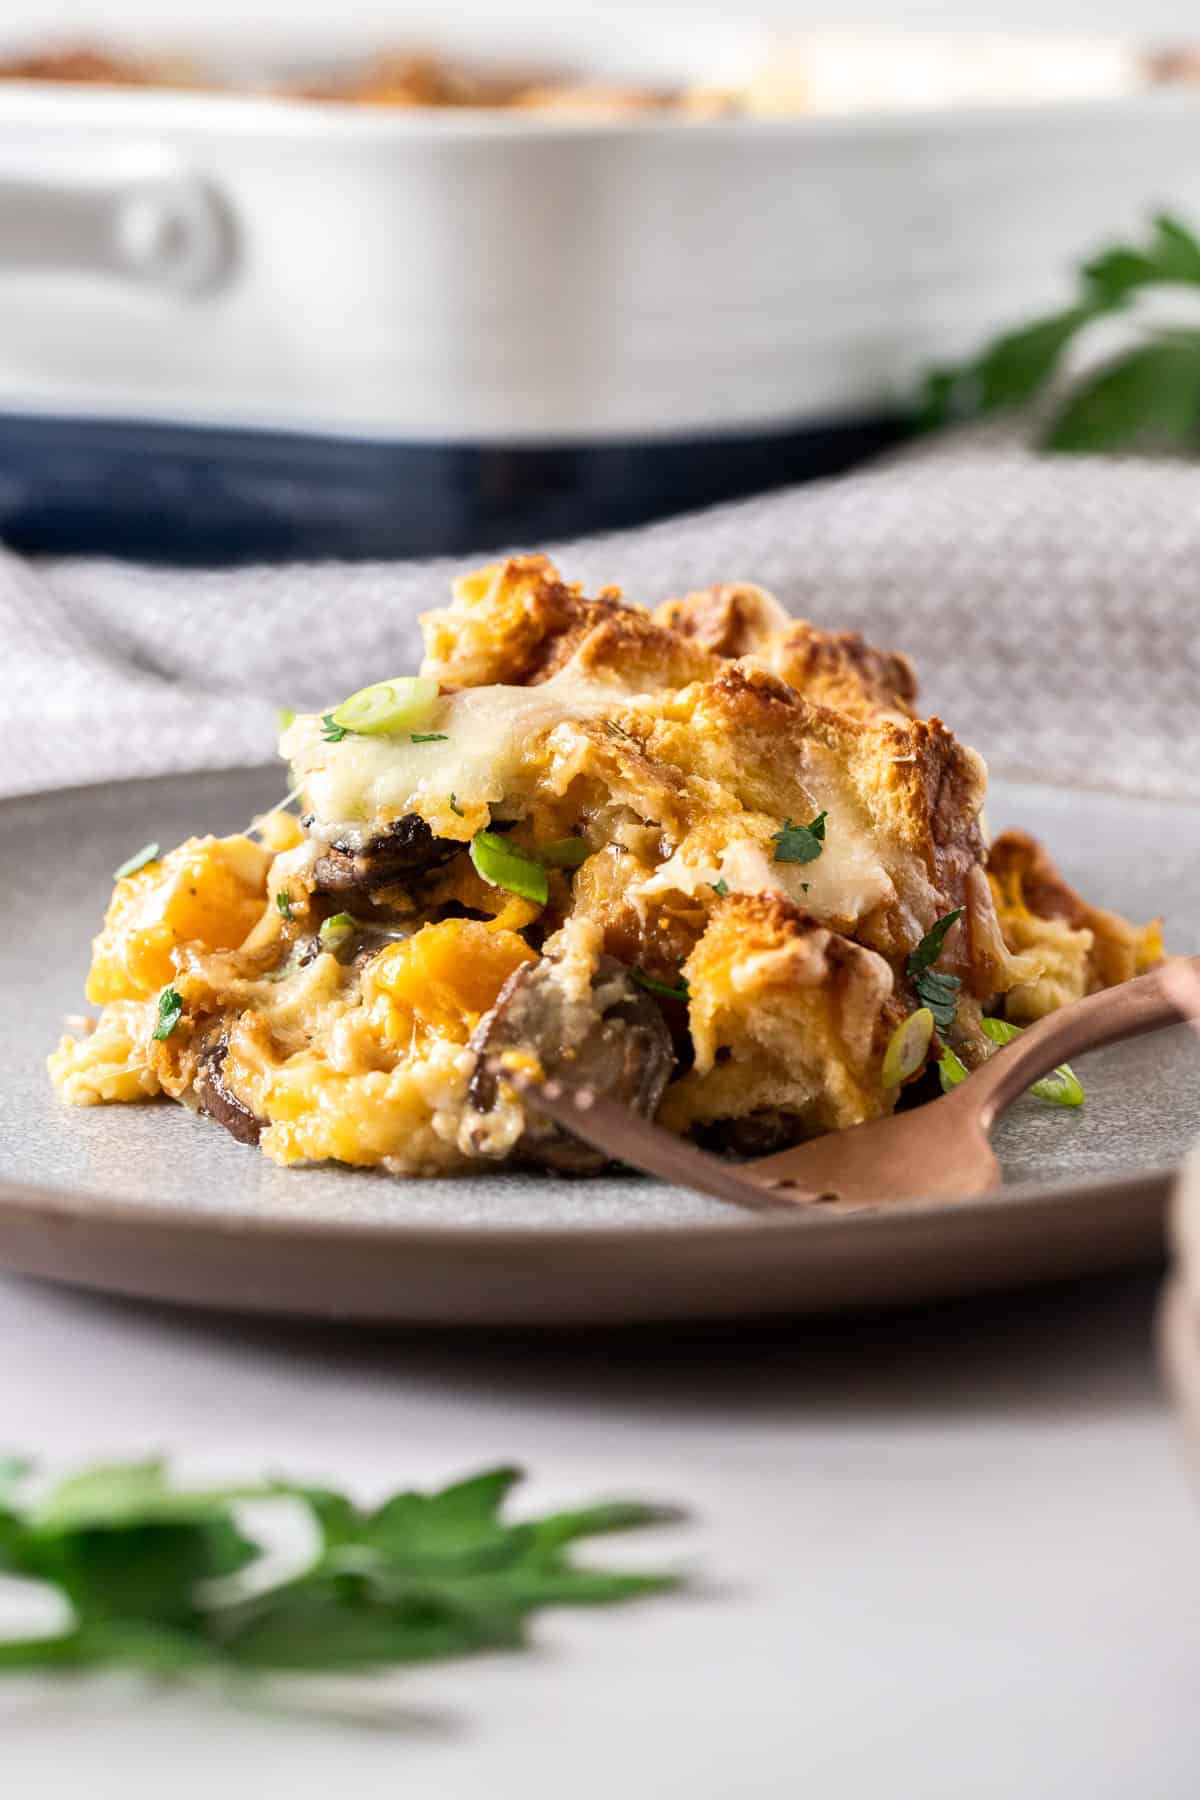 A single serving of savory bread pudding on a plate.